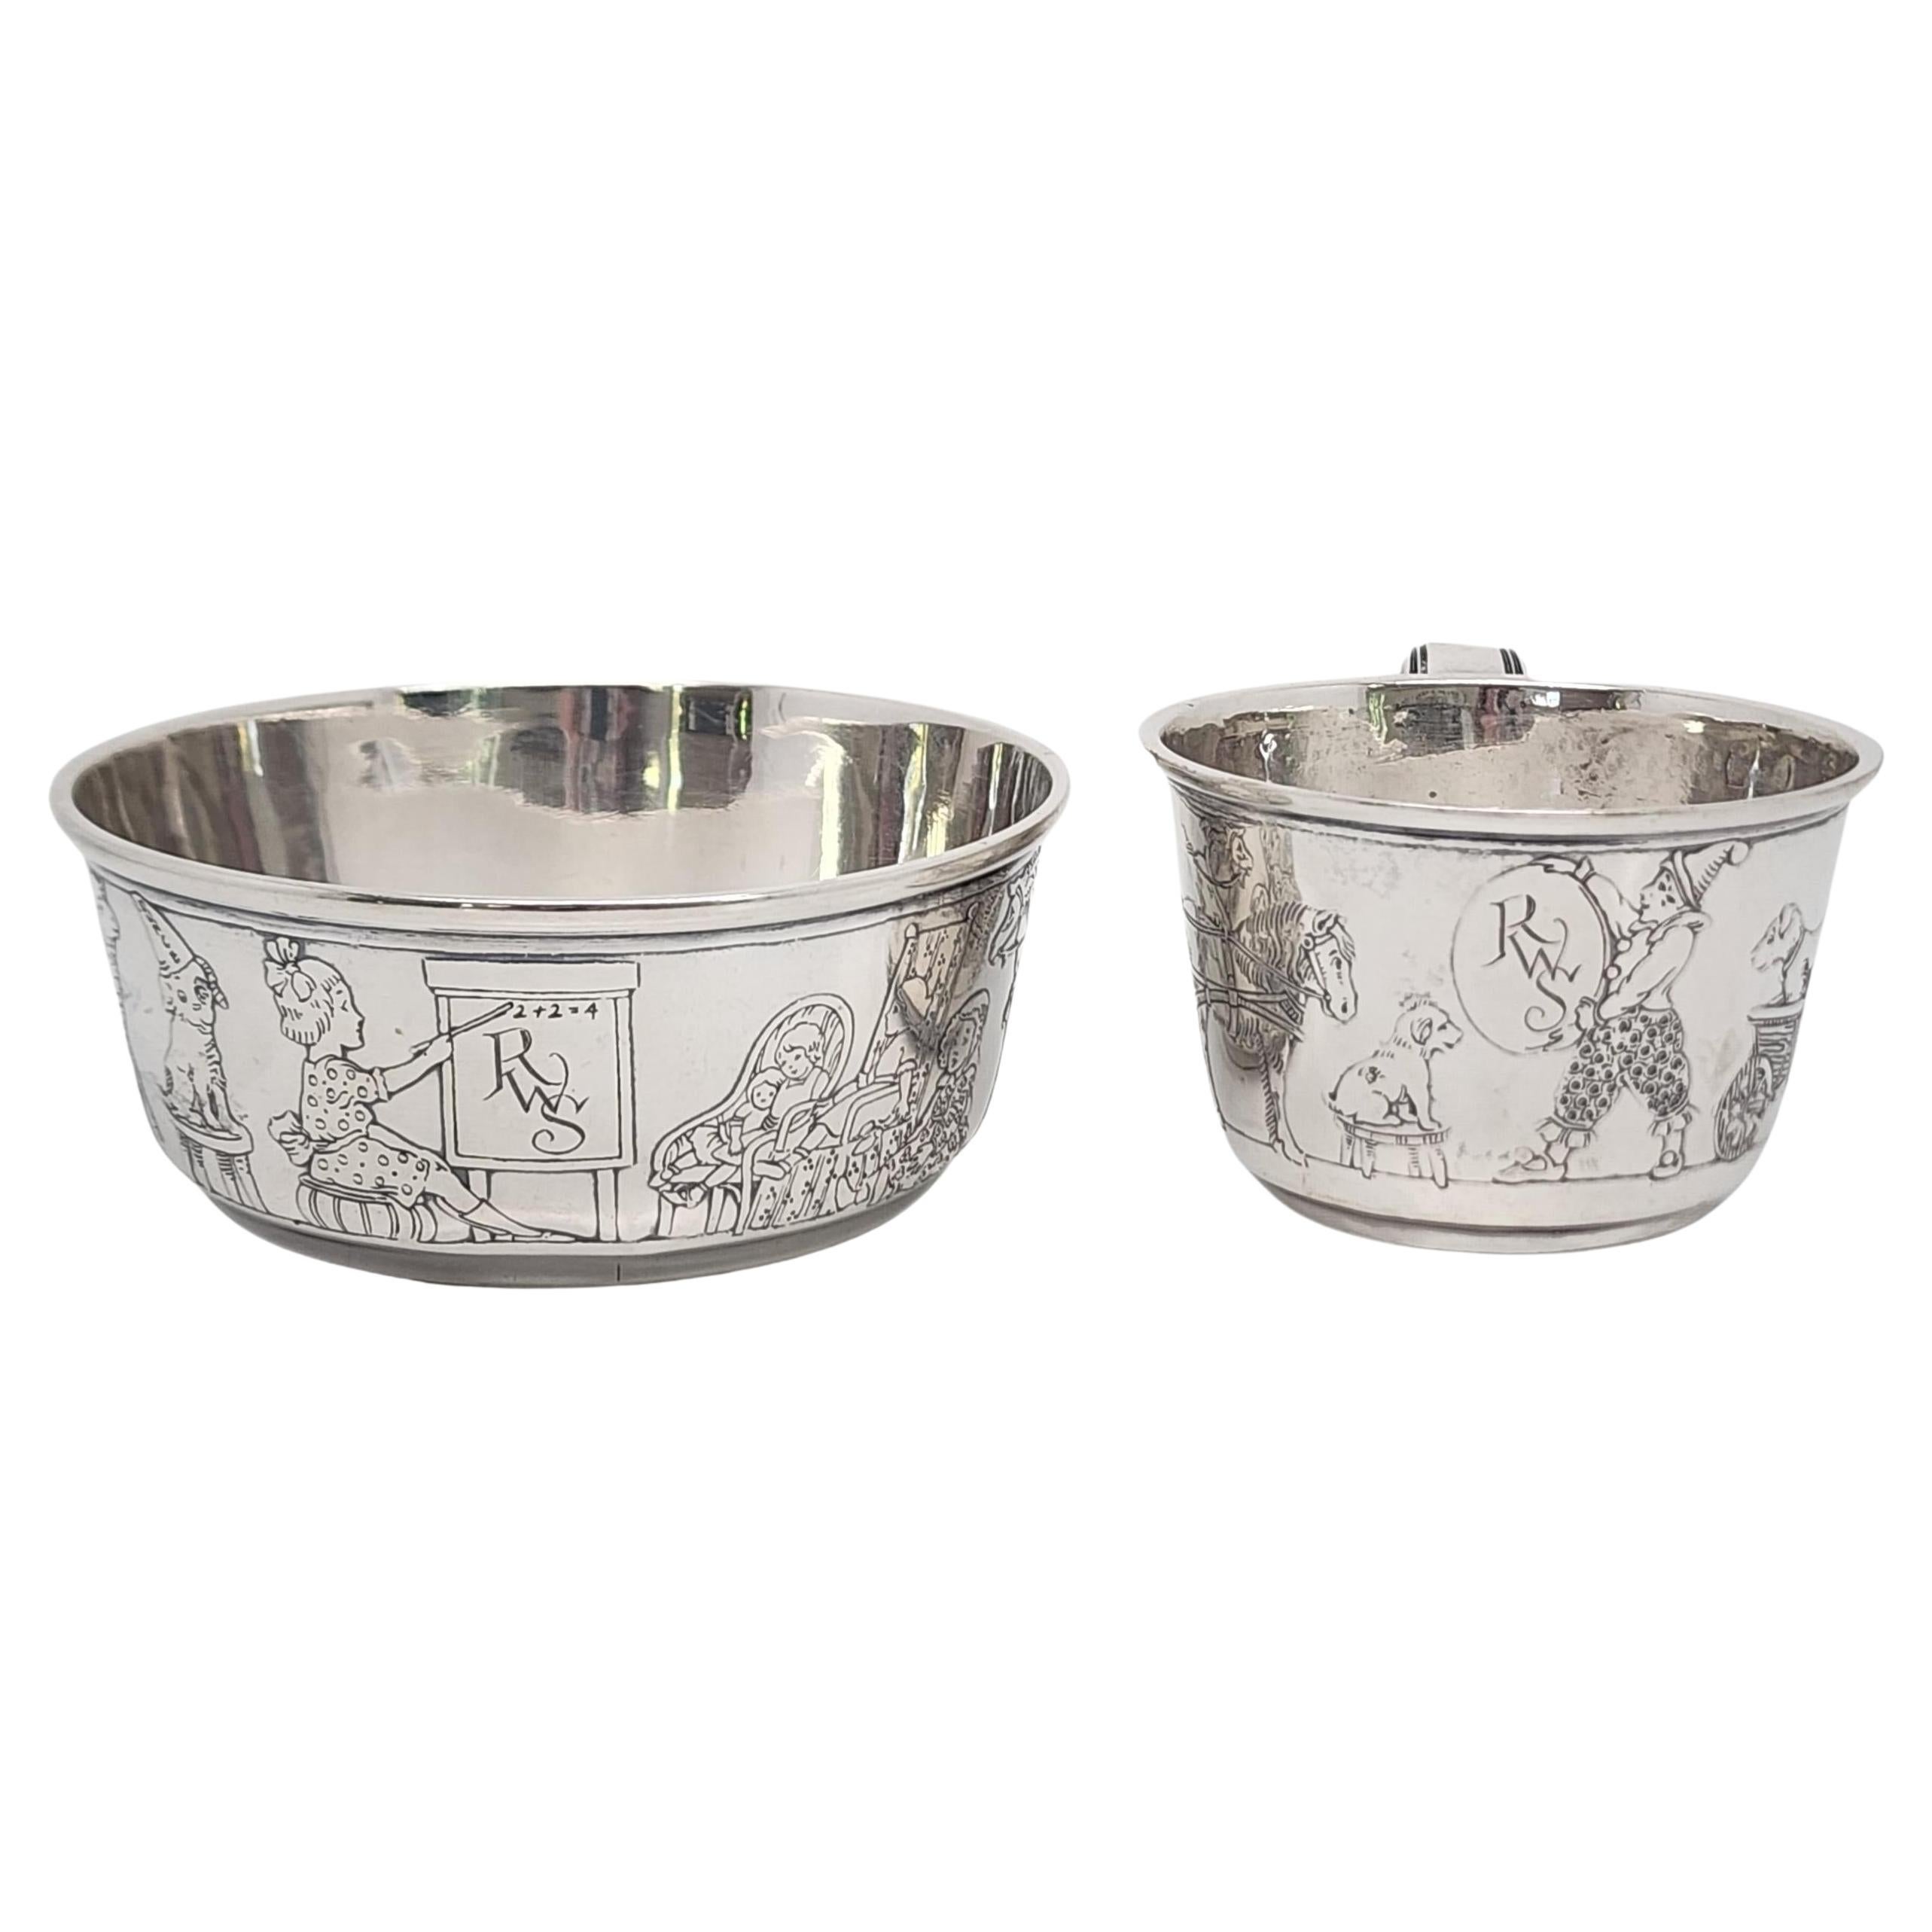 R Blackinton & Co Sterling Silver Child Bowl and Cup w/Mono #15714 For Sale